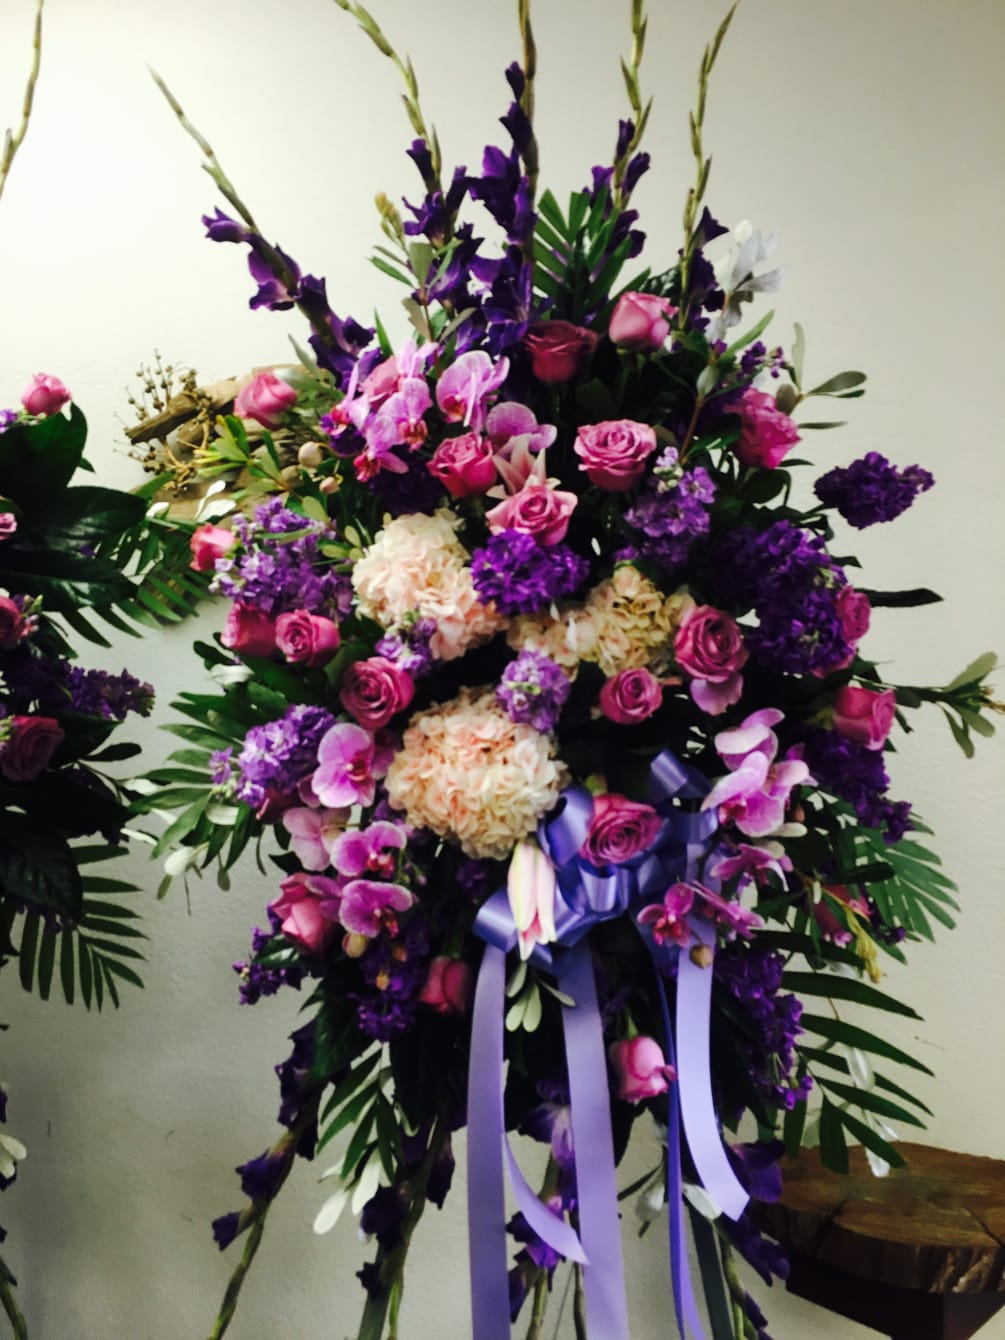 This beautiful standing spray consists of lavender roses, lavender stock, purple stock